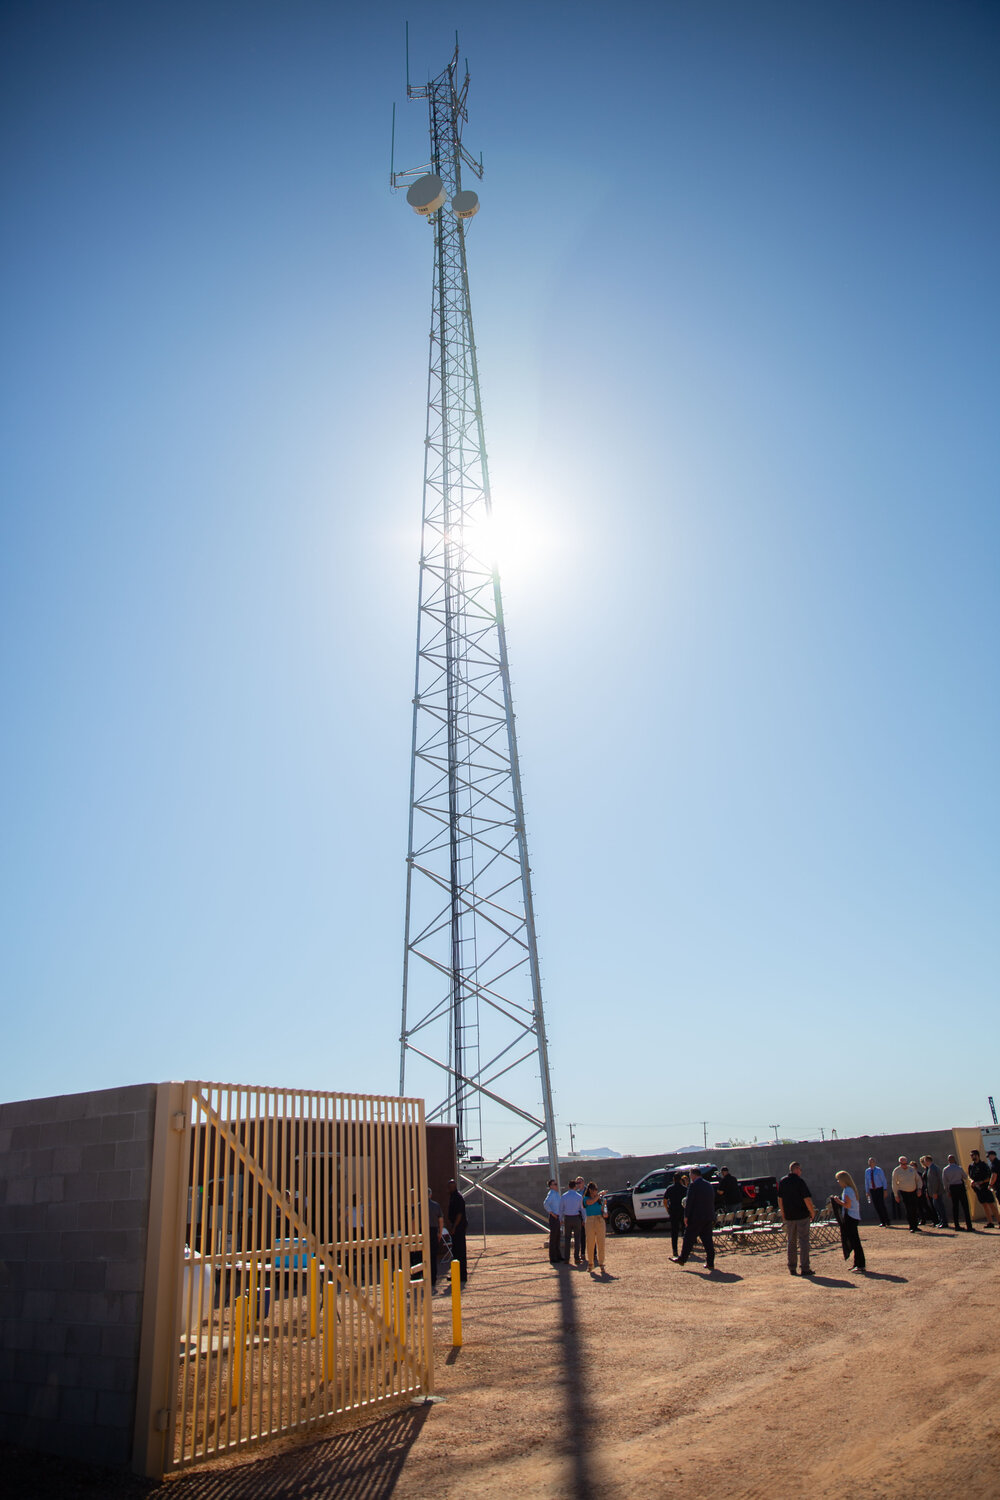 The new tower, known as H60 (for Highway 60), will improve the coverage area for public safety radios, especially for northeast Mesa, Apache Junction and Queen Creek.